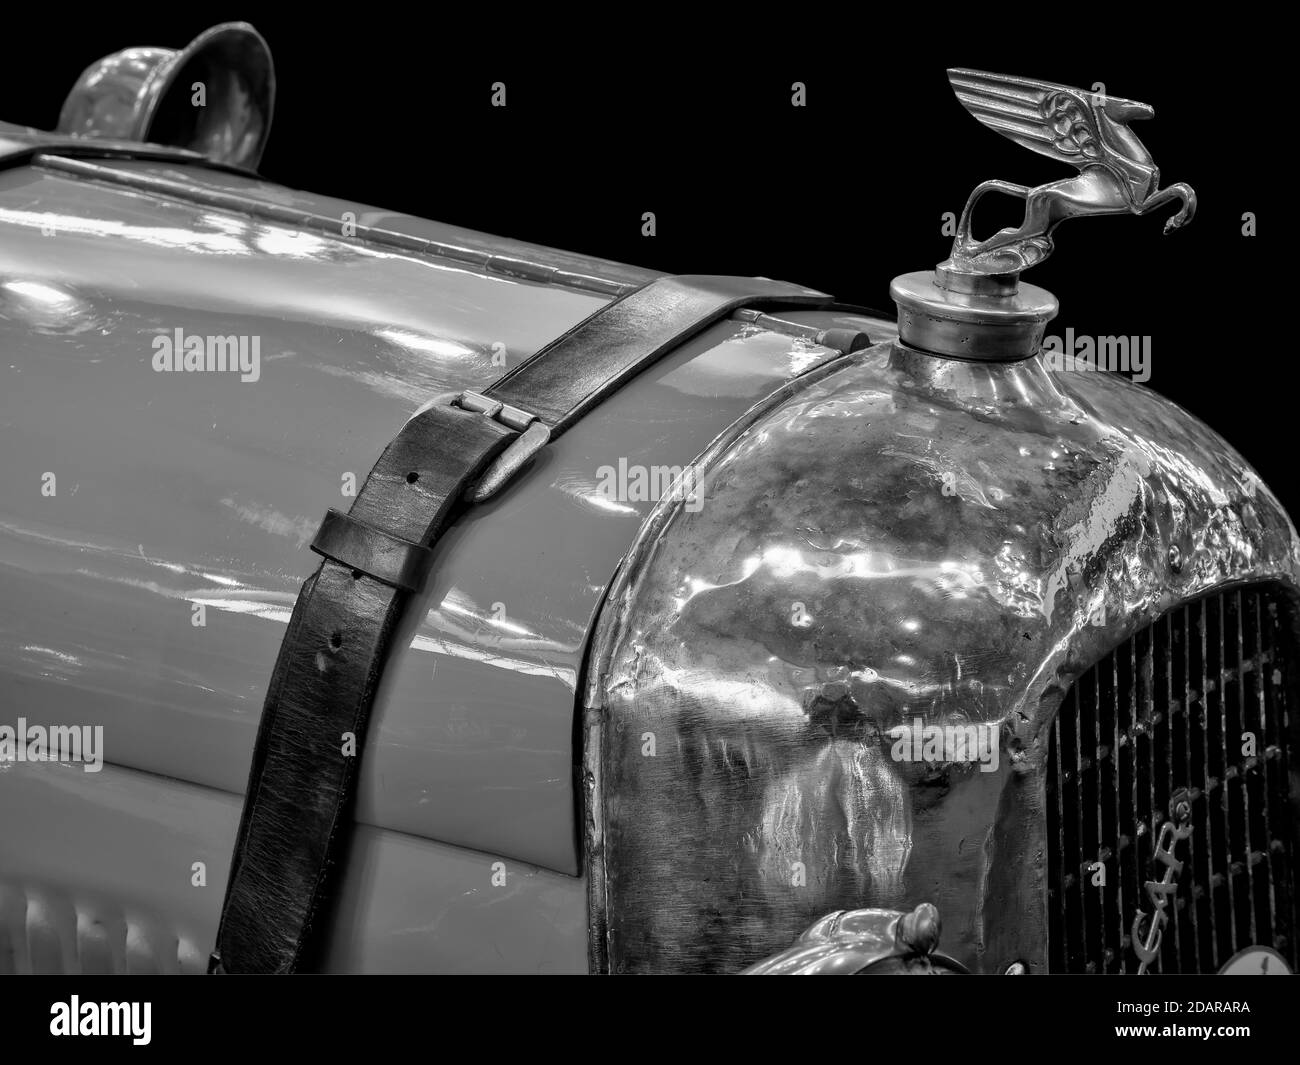 Radiator mascot from classic car Amilcar CGS, in black and white Stock Photo